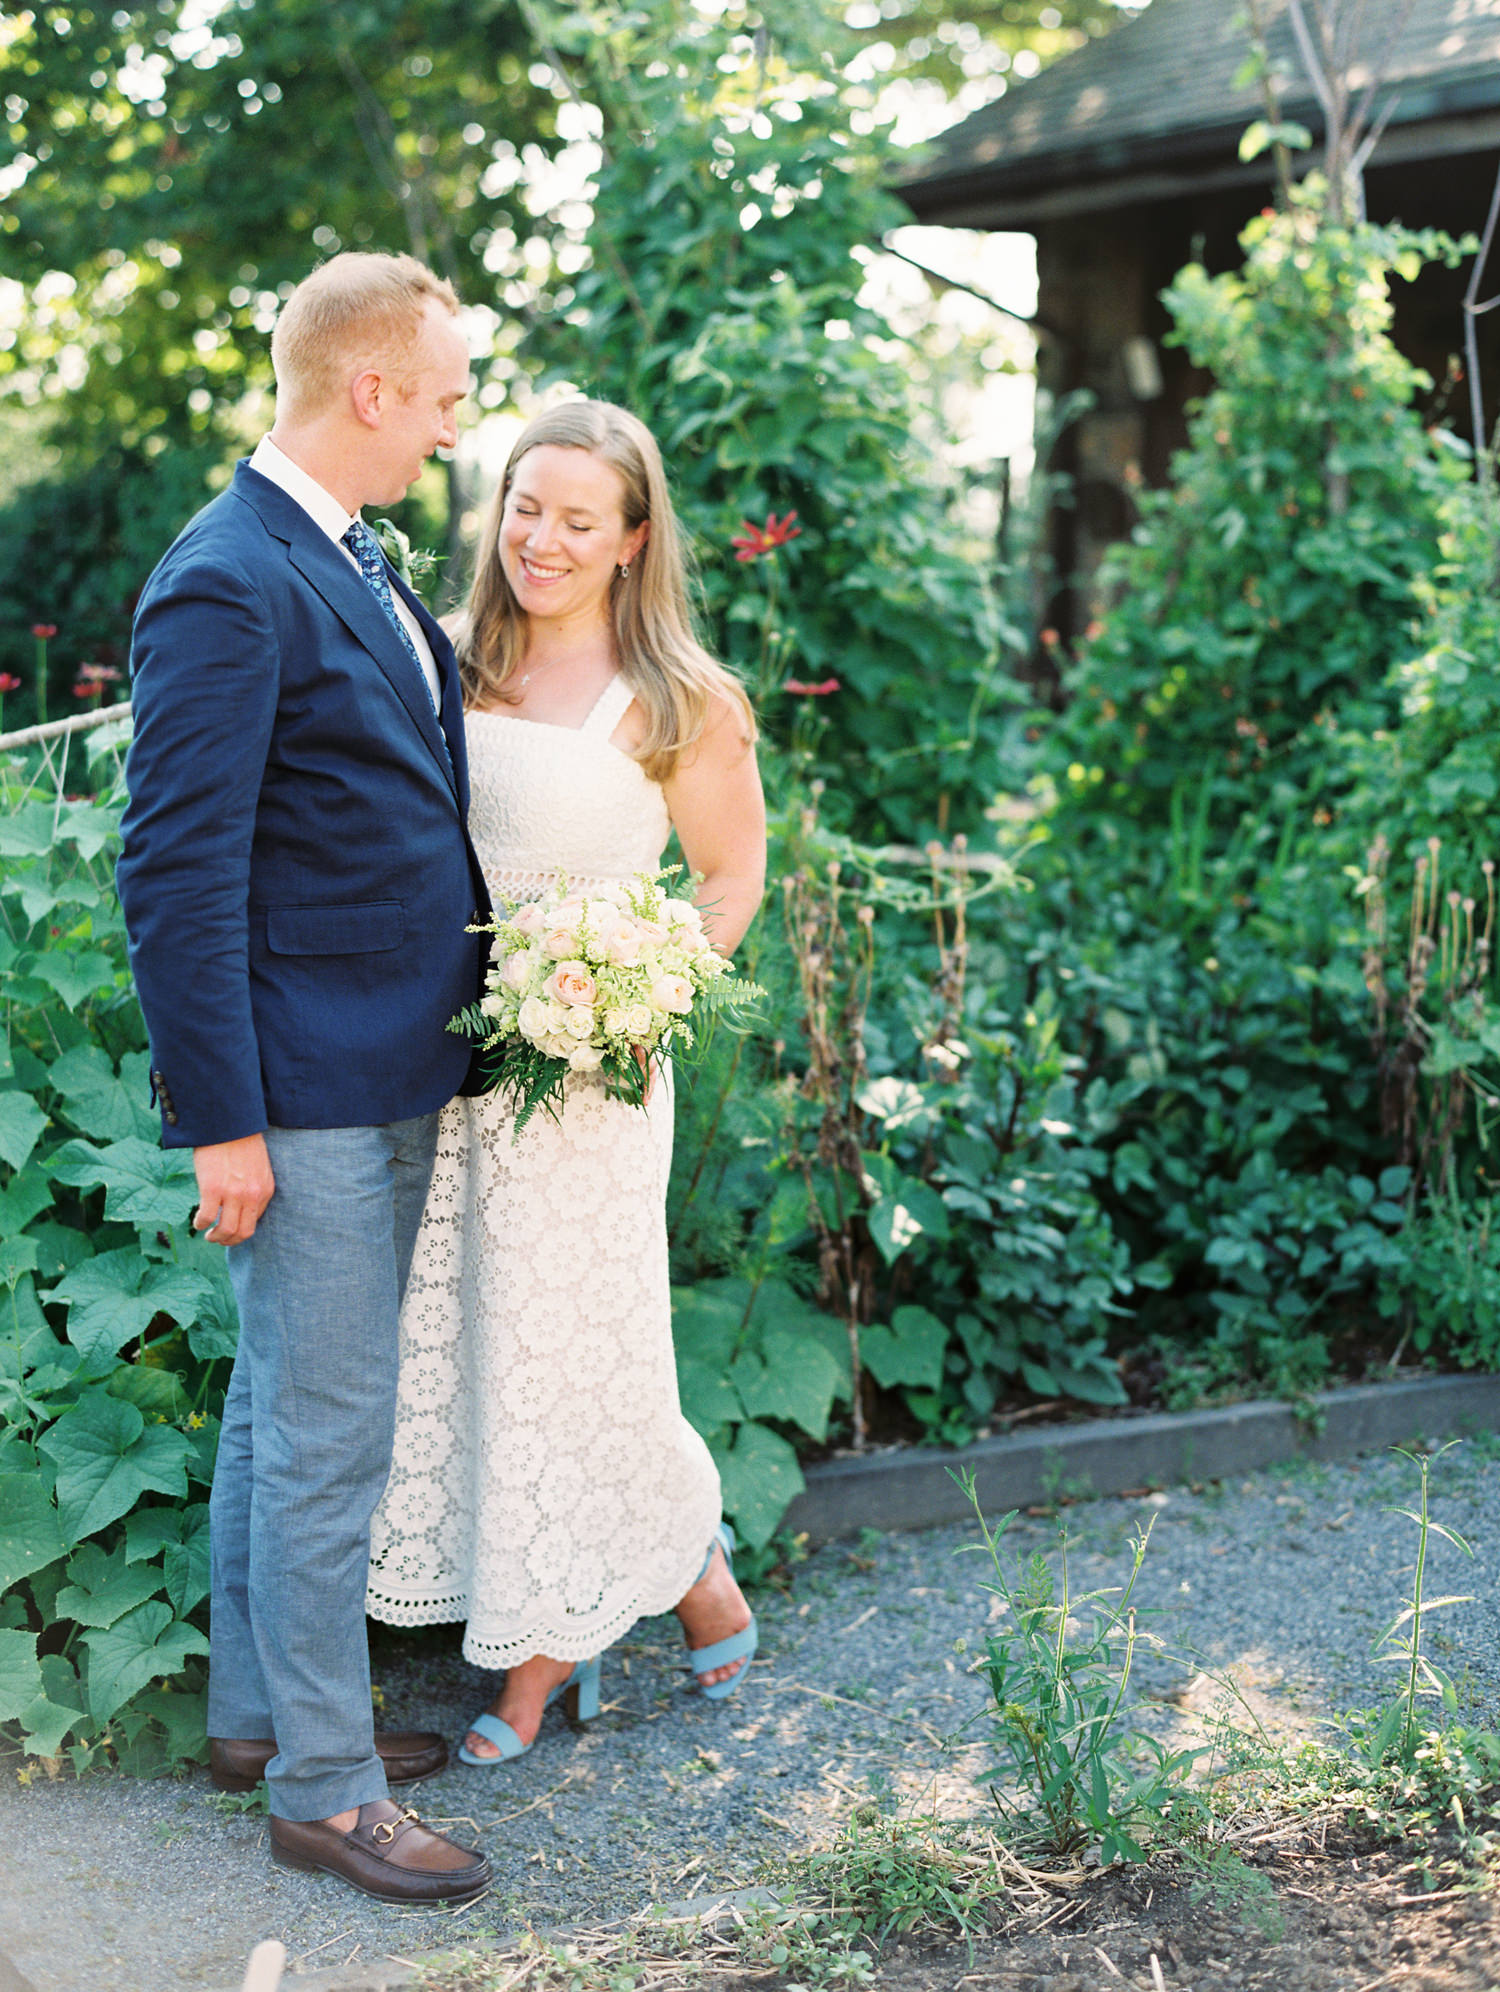 Garden Wedding Dress Style | Intimate Picnic Wedding at Blue Hill Stone Barns | photographed by Mary Dougherty 